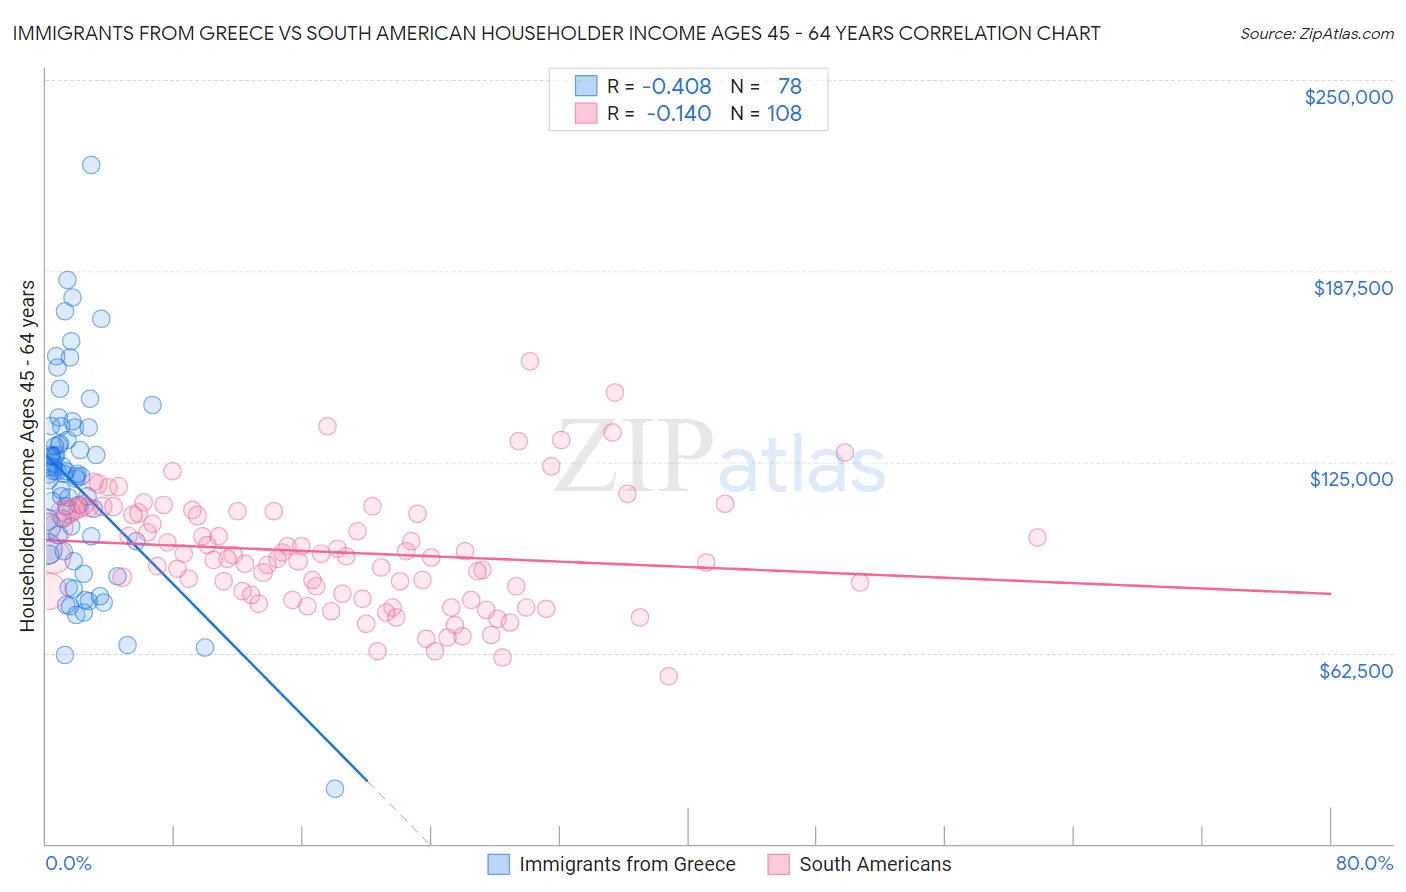 Immigrants from Greece vs South American Householder Income Ages 45 - 64 years